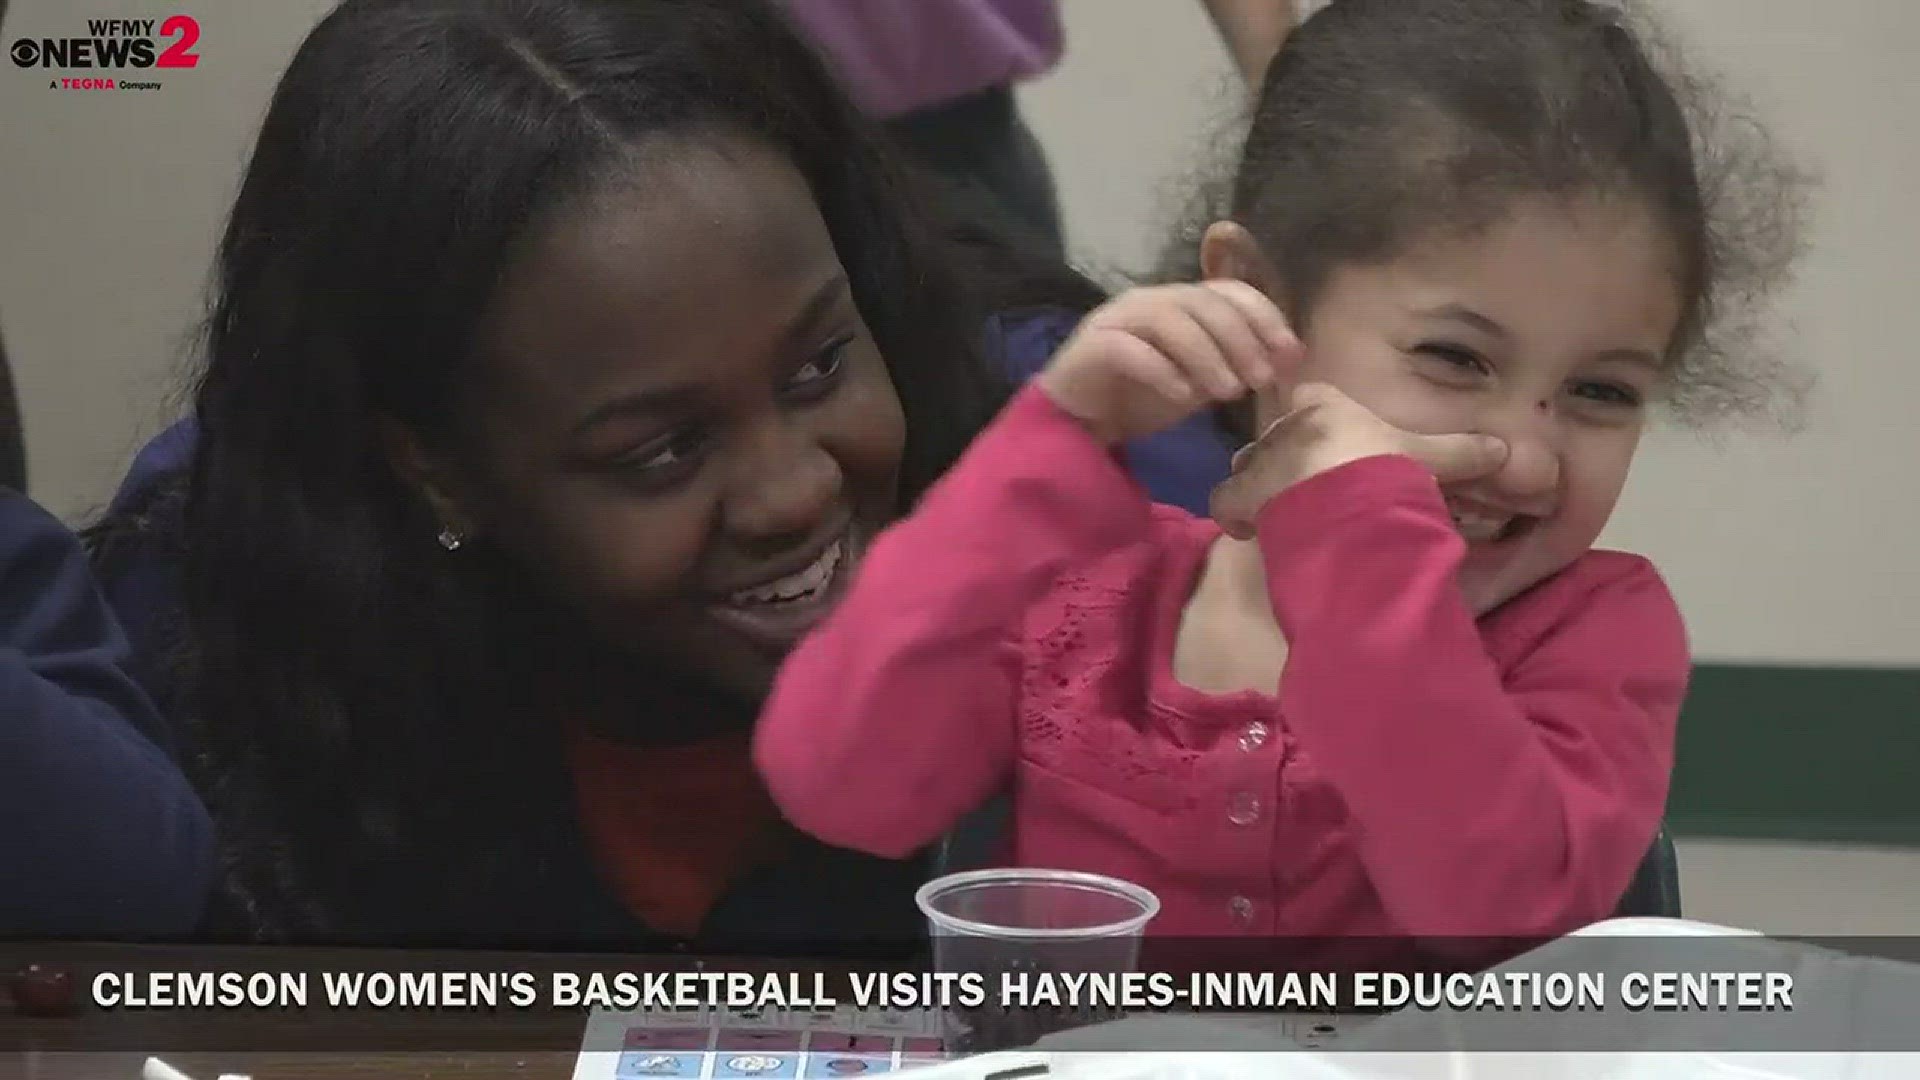 On Tuesday, the Clemson Women's Basketball team visited the Meredith Leigh Haynes-Inman Education Center in Jamestown, which serves approximately 130 students with special needs, thanks to outreach initiatives taking place throughout the tournament.